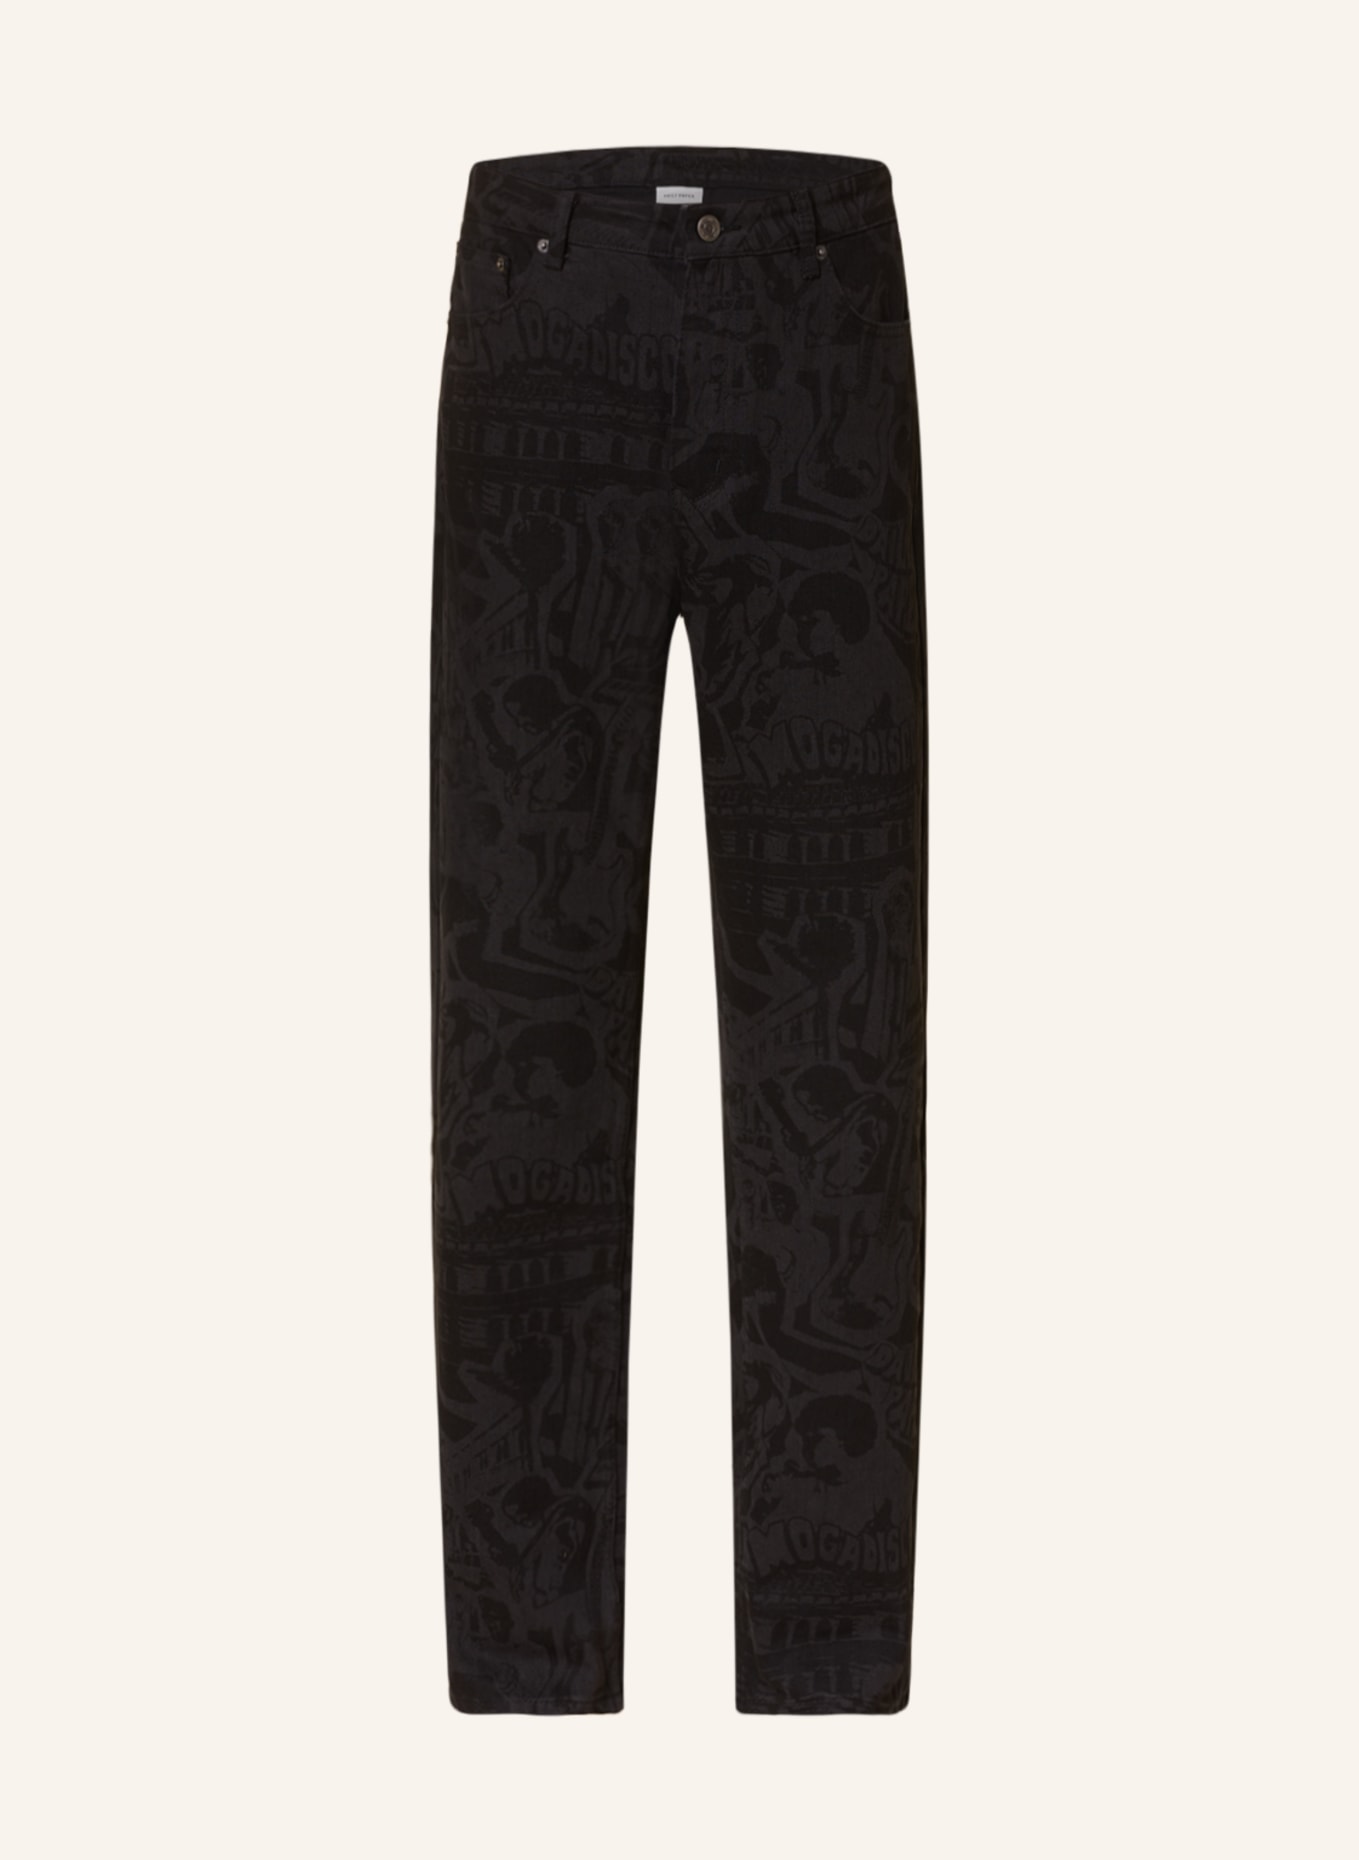 DAILY PAPER Jeans HOYAM Straight Fit, Farbe: BLACK (Bild 1)